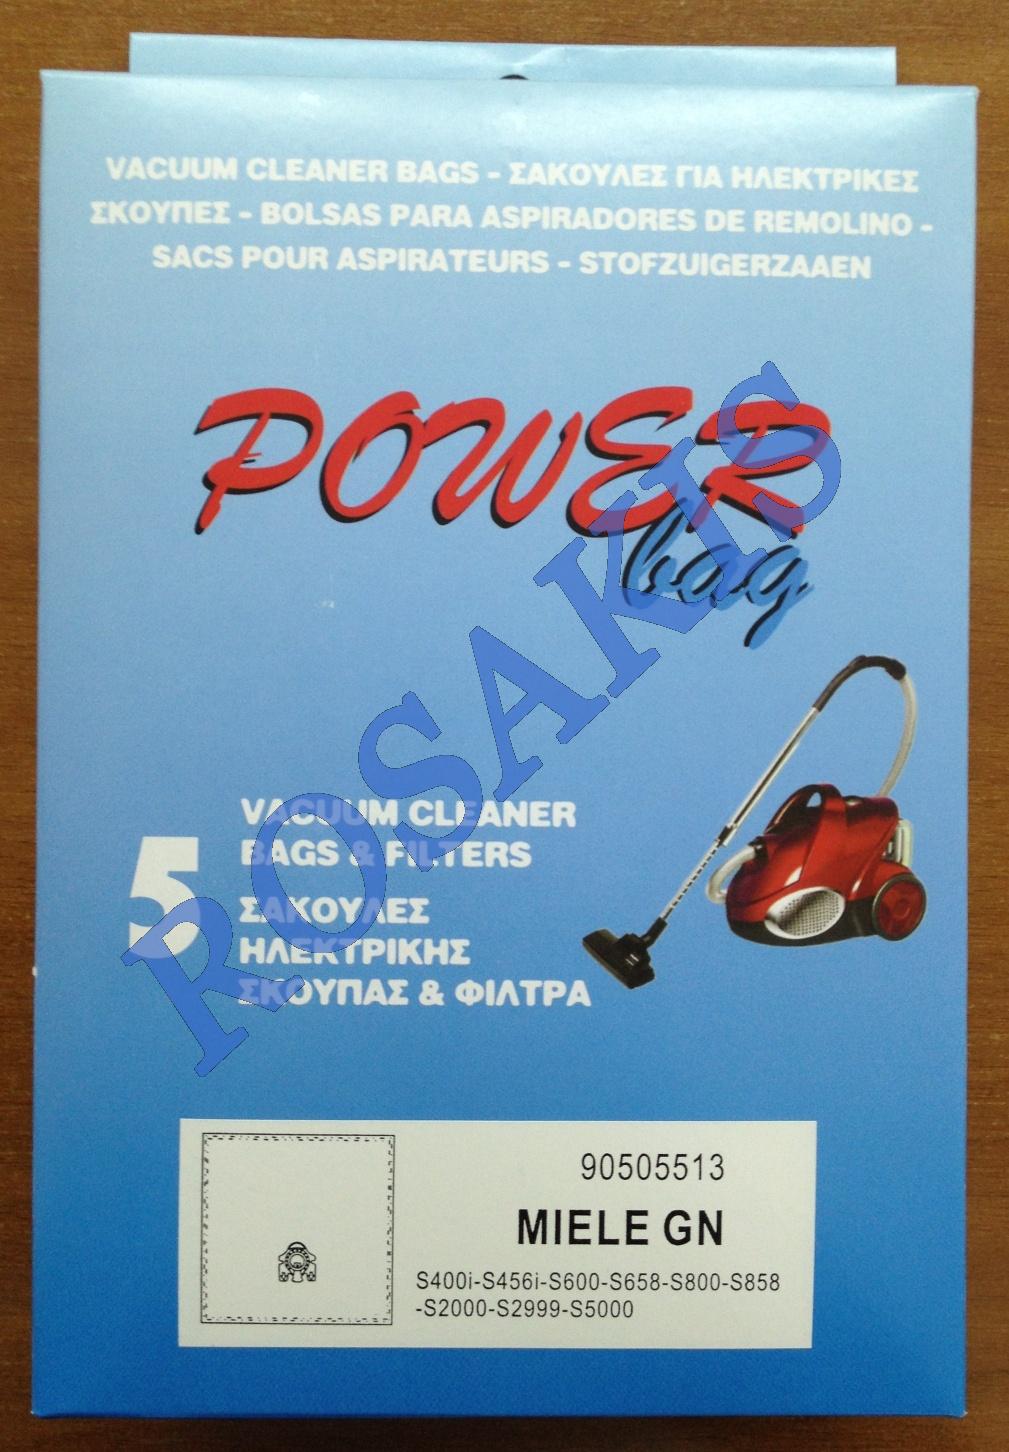 TEXTILE DUST BAG MIELE GN MICROPOP ΝΟΤ AVAILABLE